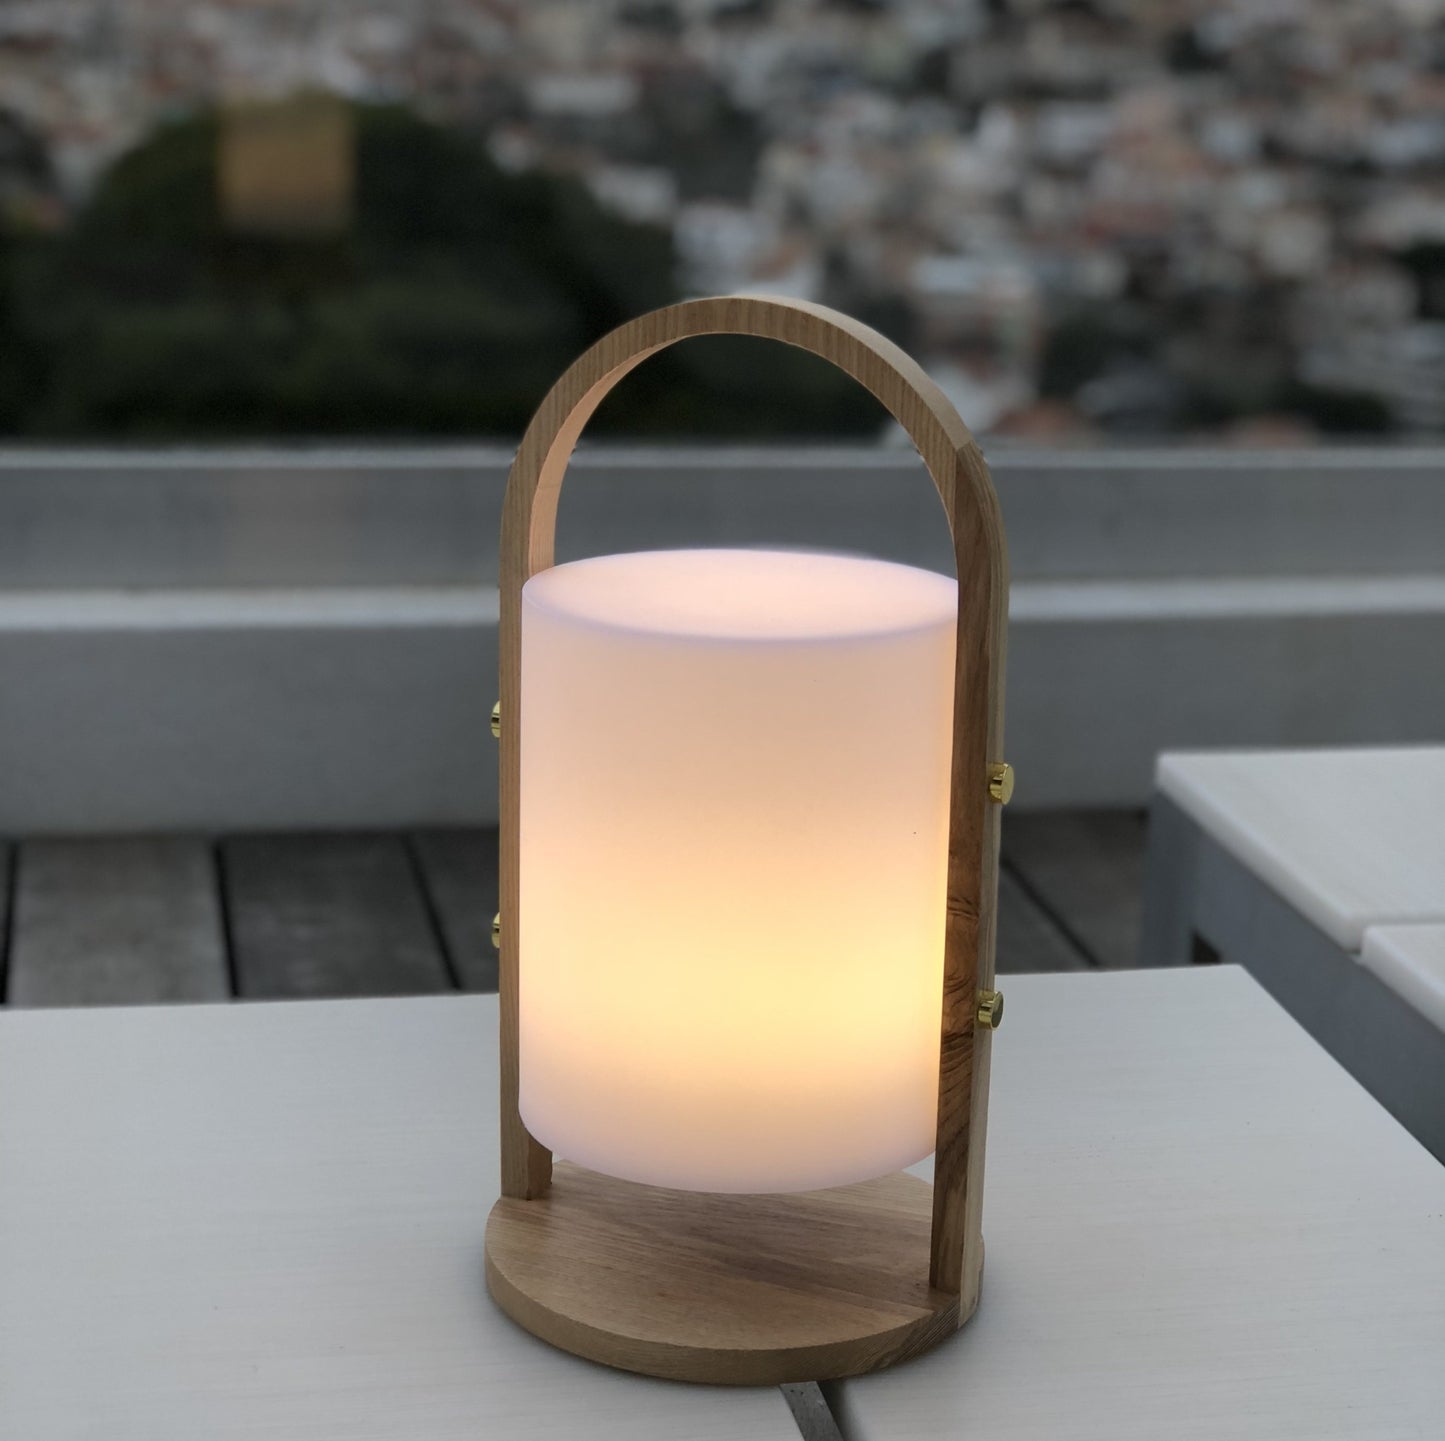 Wireless lantern Scandinavian design natural wood handle LED warm white/white dimmable WOODY H37cm